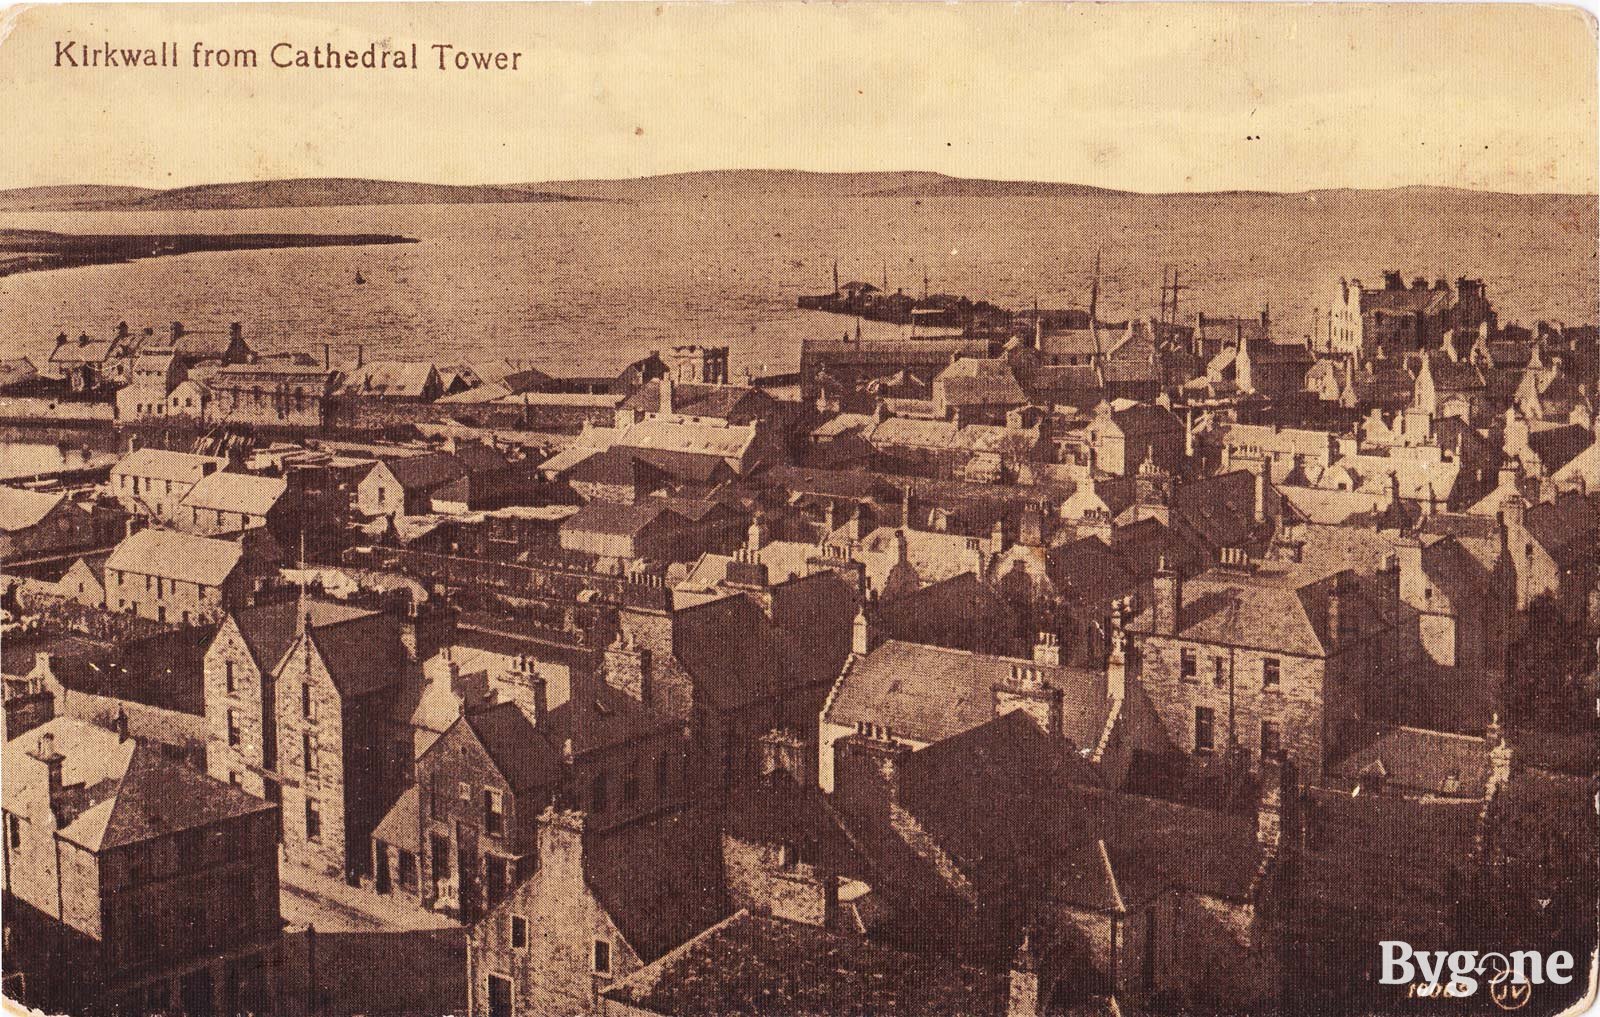 View from Cathedral Tower, Kirkwall, Orkney, Scotland.